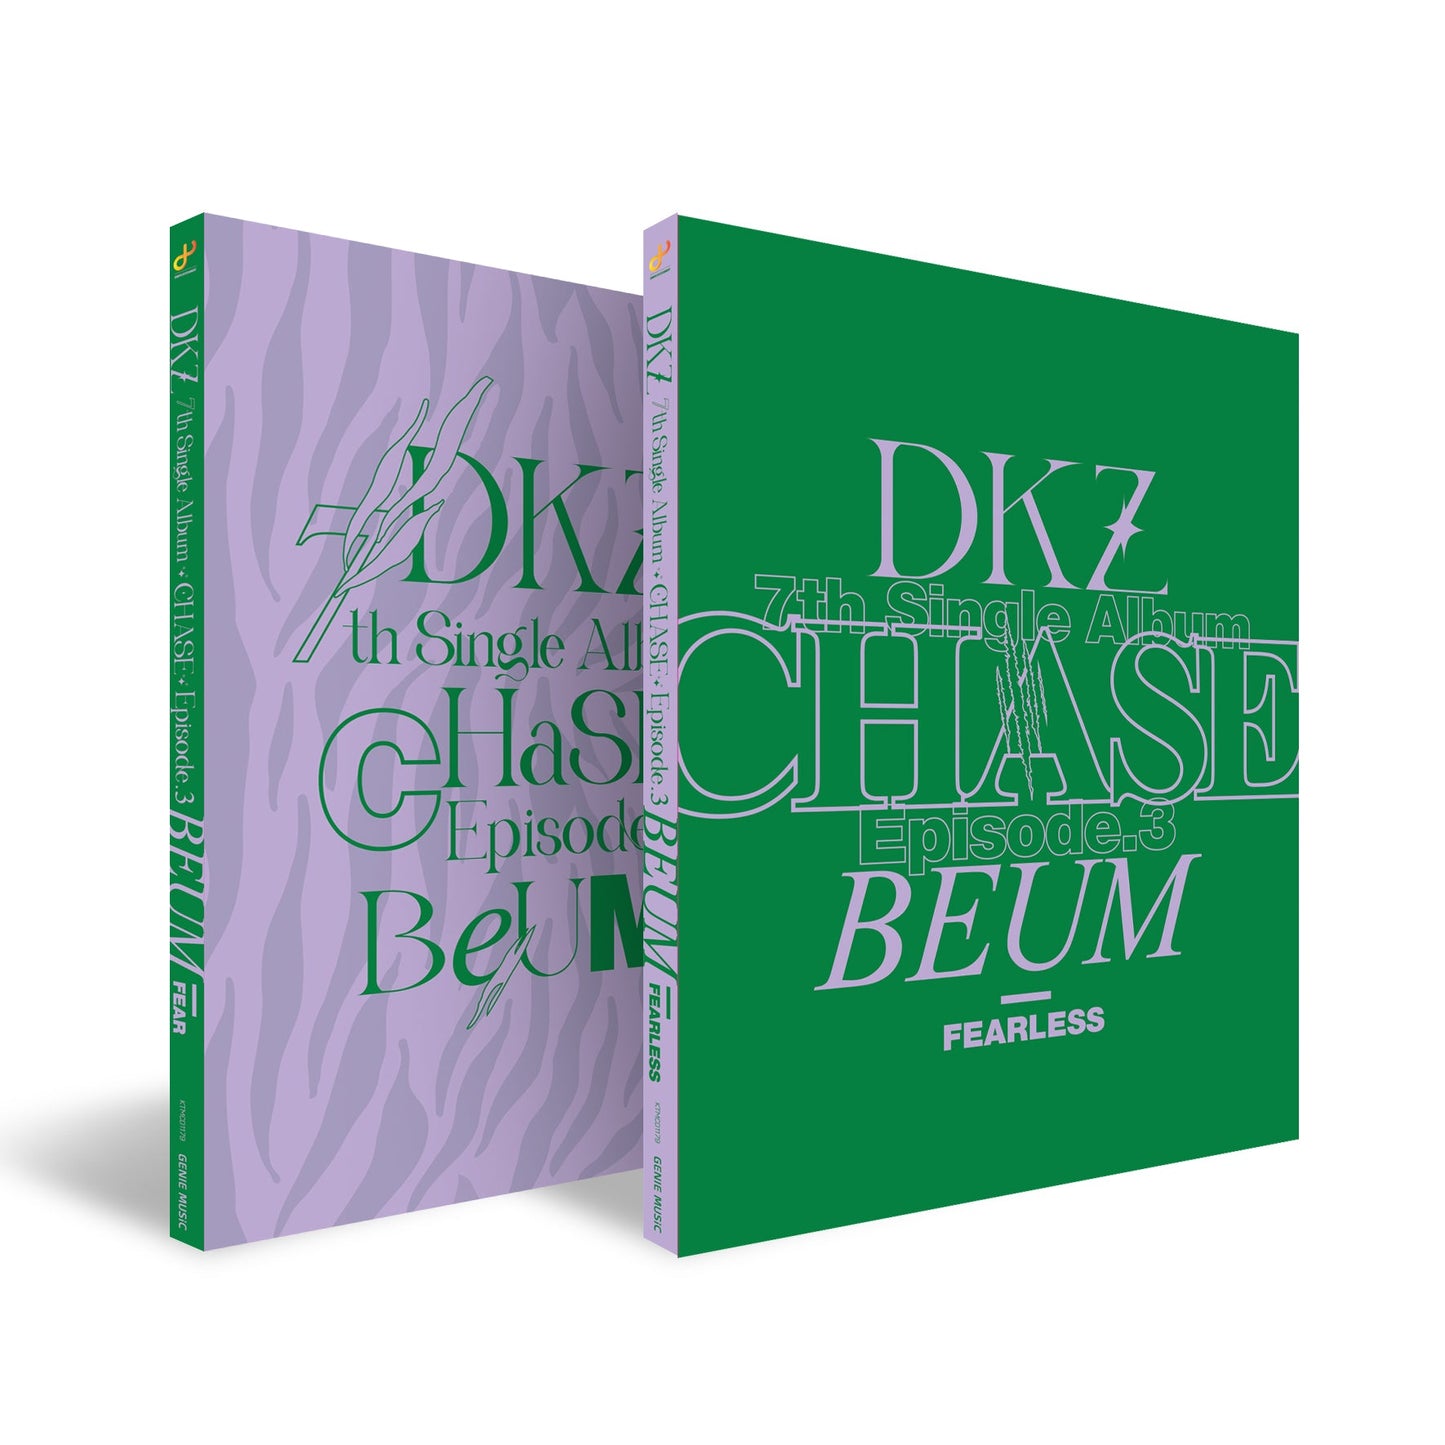 DKZ 7TH SINGLE ALBUM 'CHASE EPISODE 3. BEUM' COVER